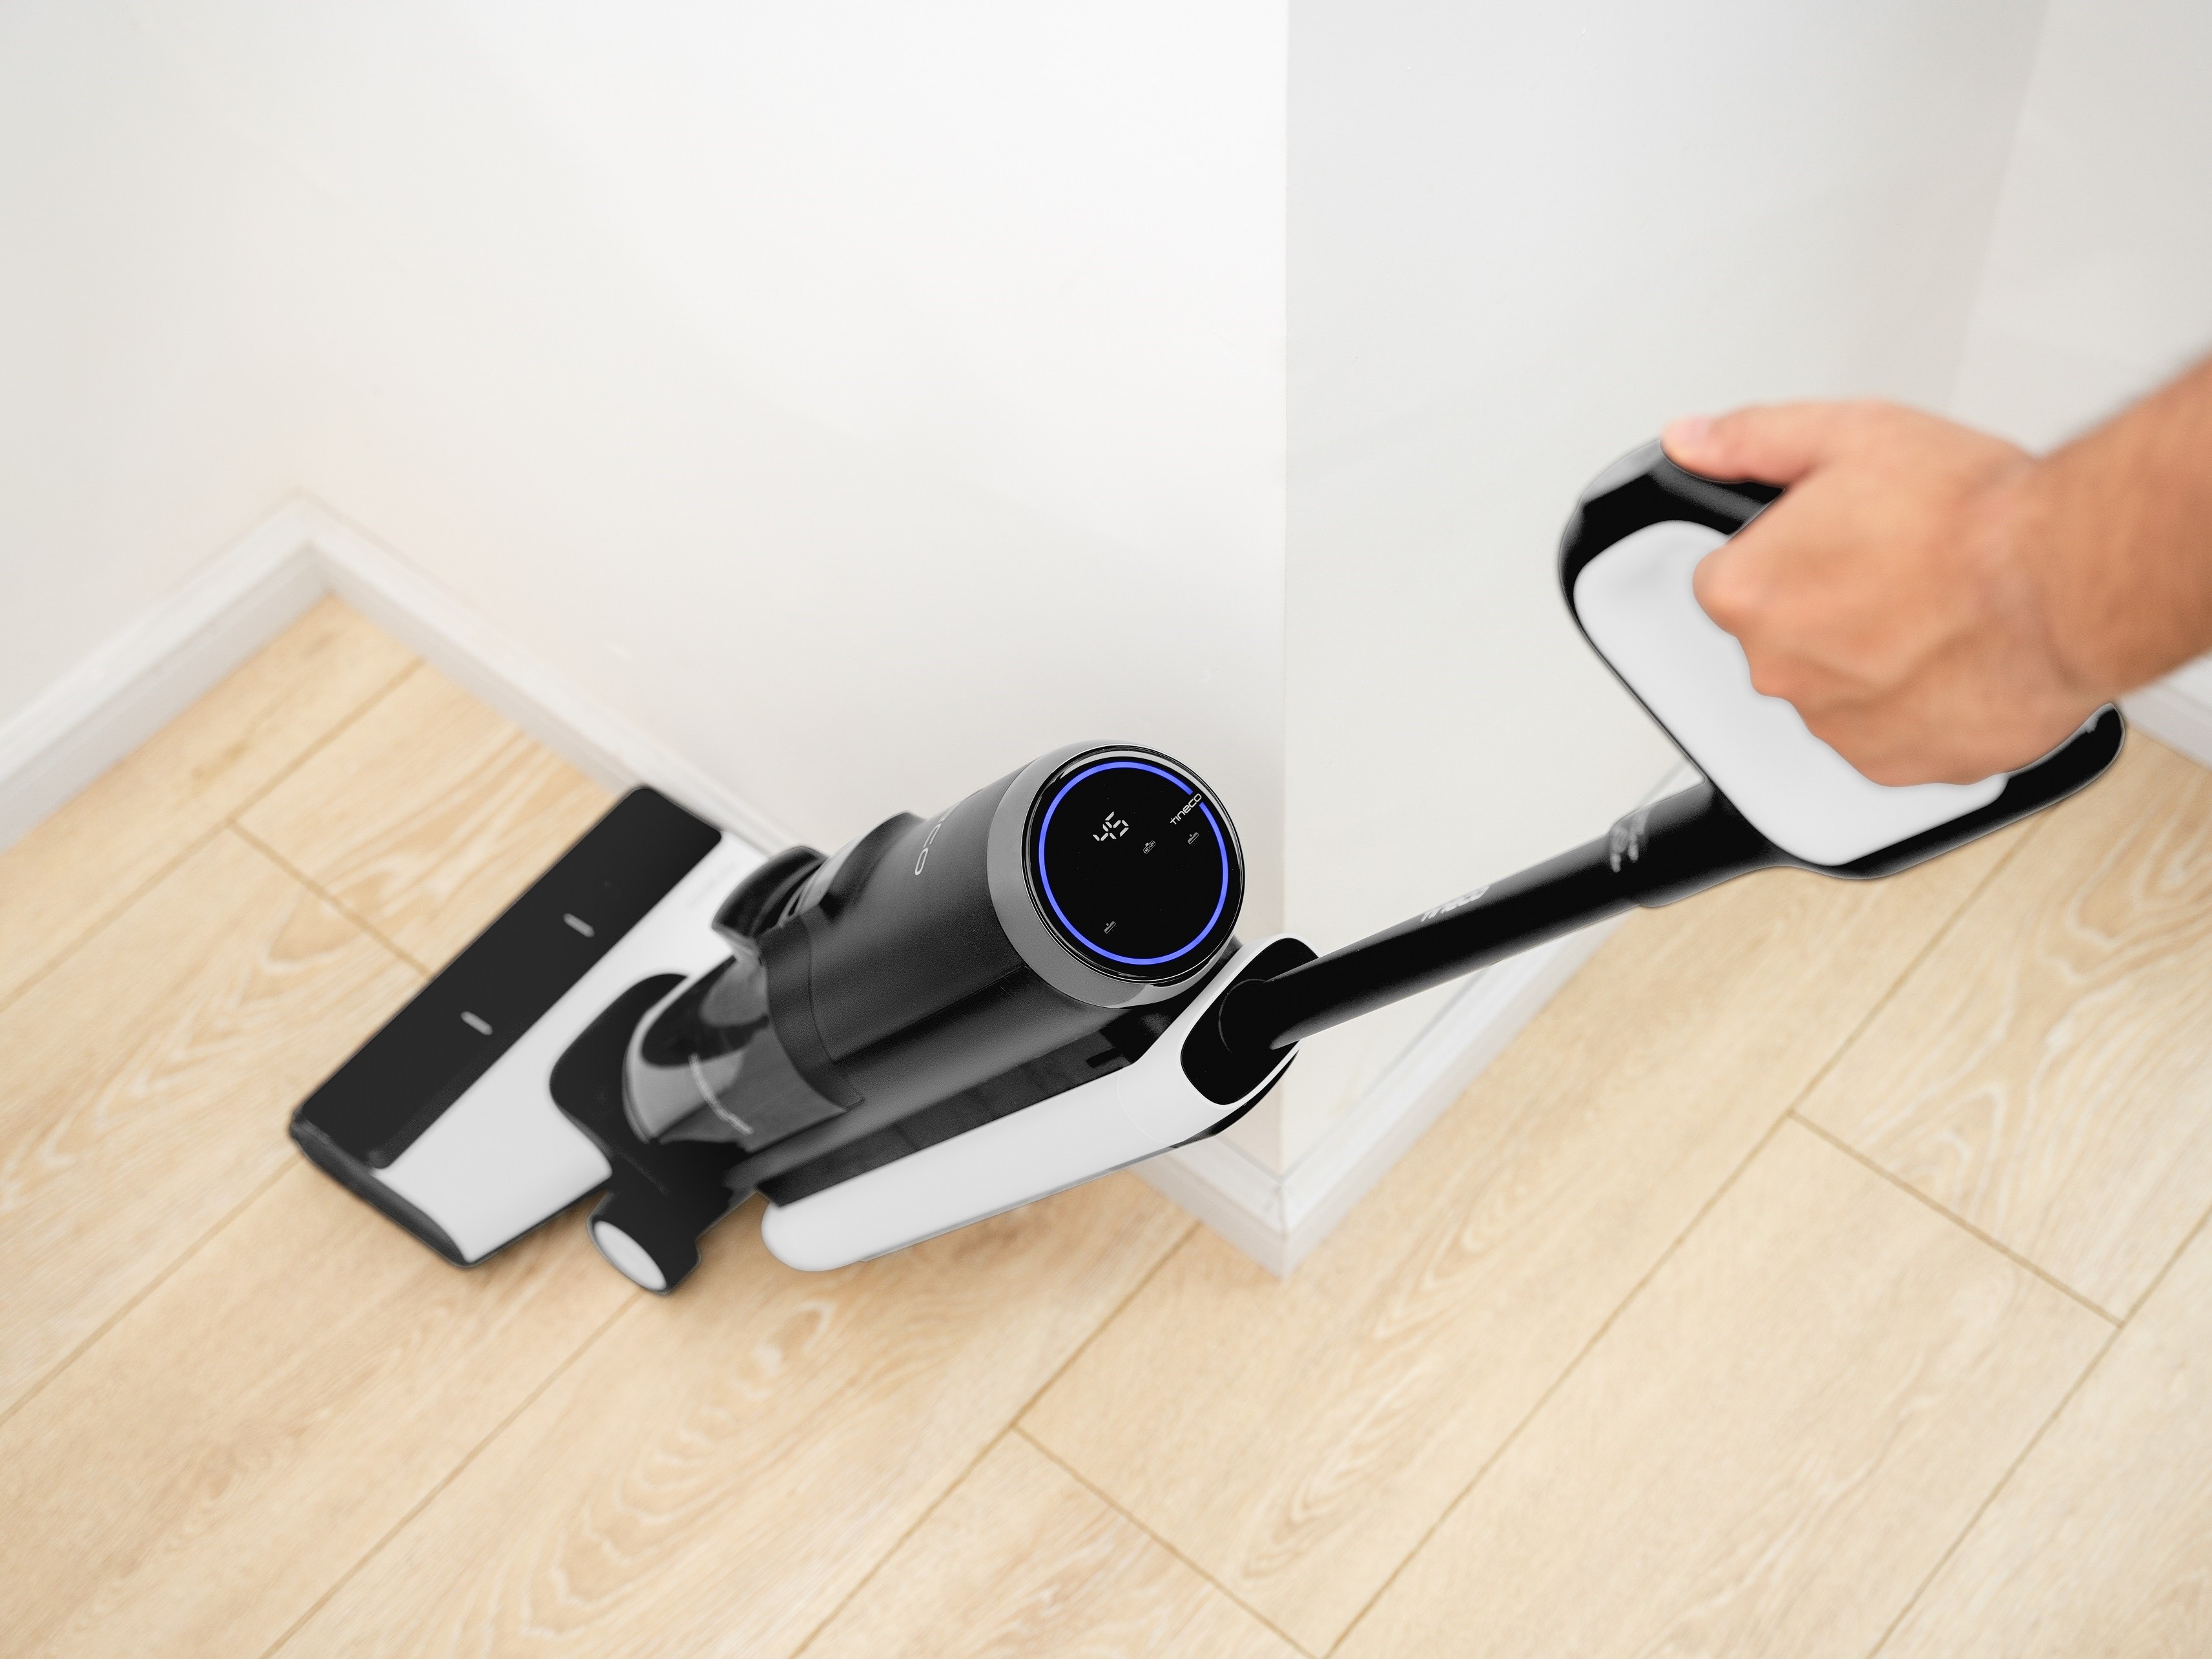 Award-winning Tineco Floor One S7 Pro wet-dry vac cleans itself